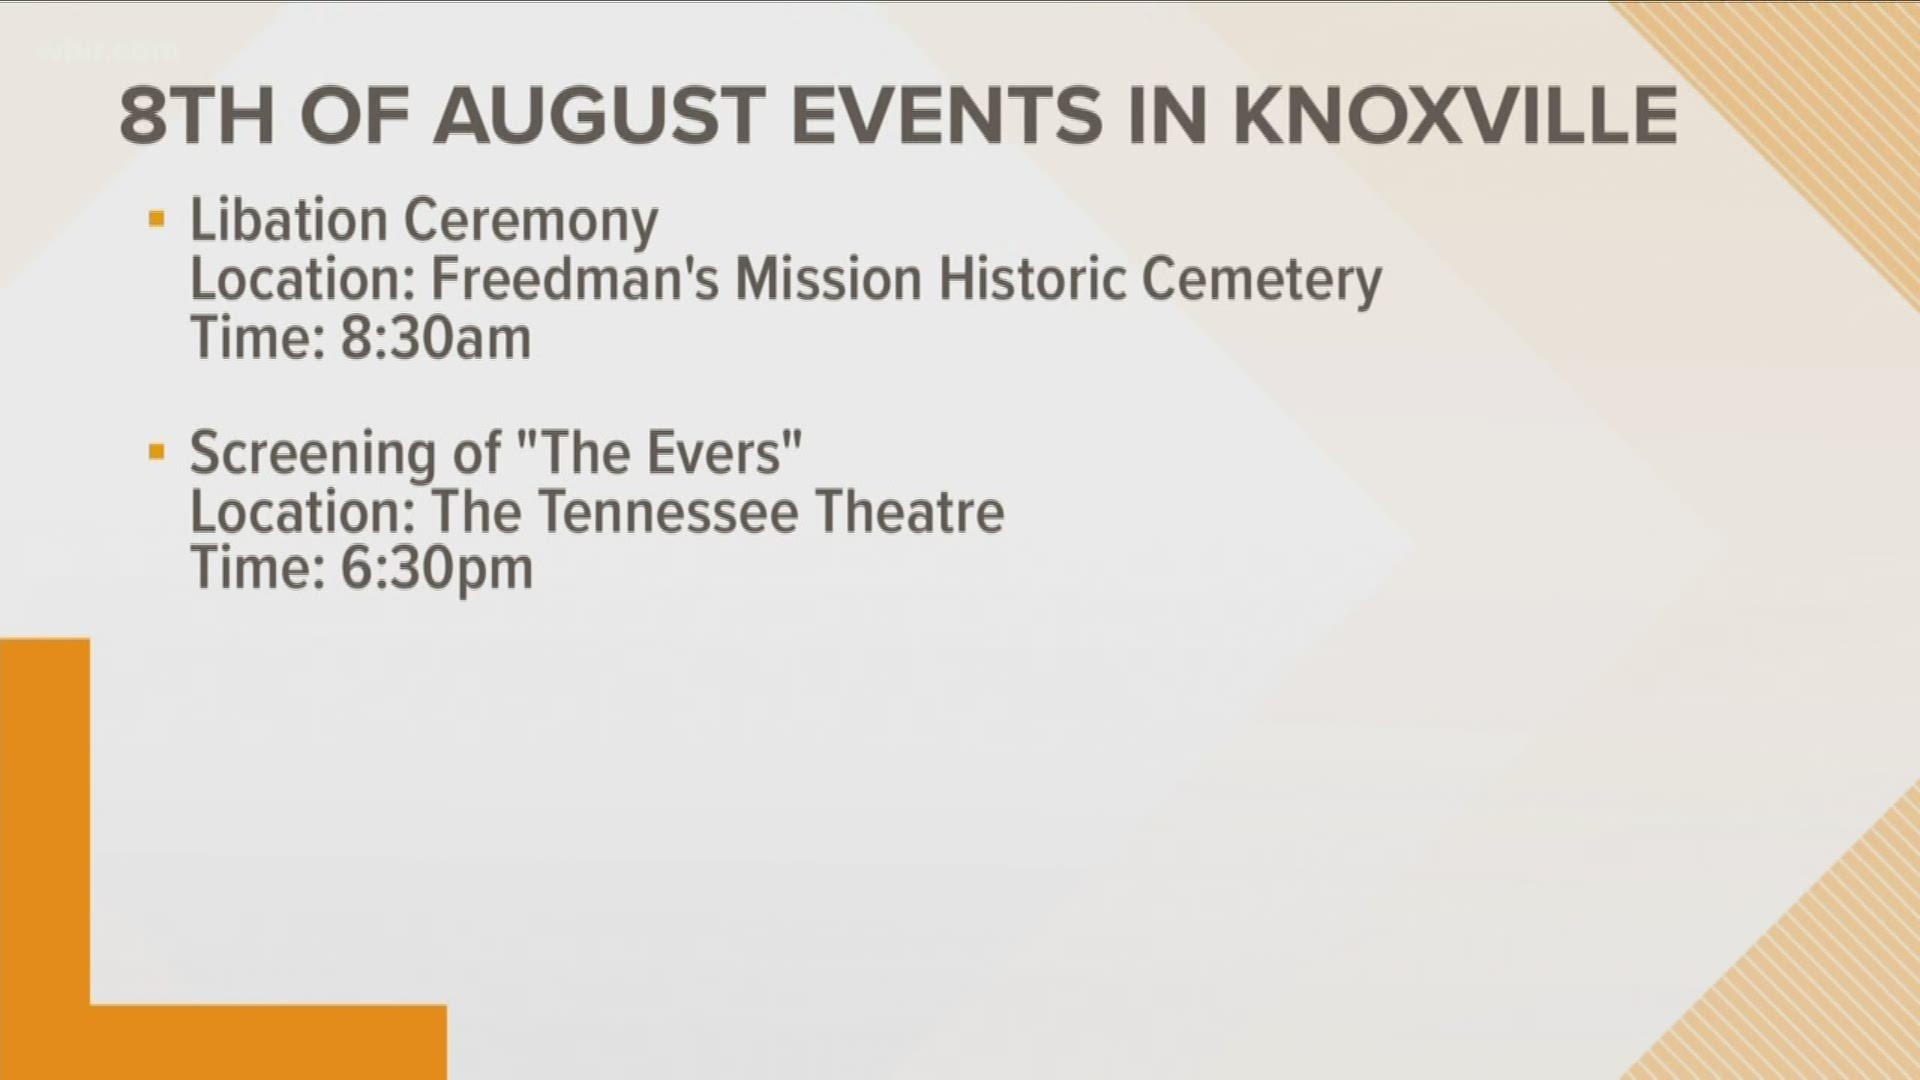 The Beck Cultural Center is celebrating "Eighth of August". It commemorates the day Tennessee Military Governor Andrew Johnson freed his personal slaves in 1863.